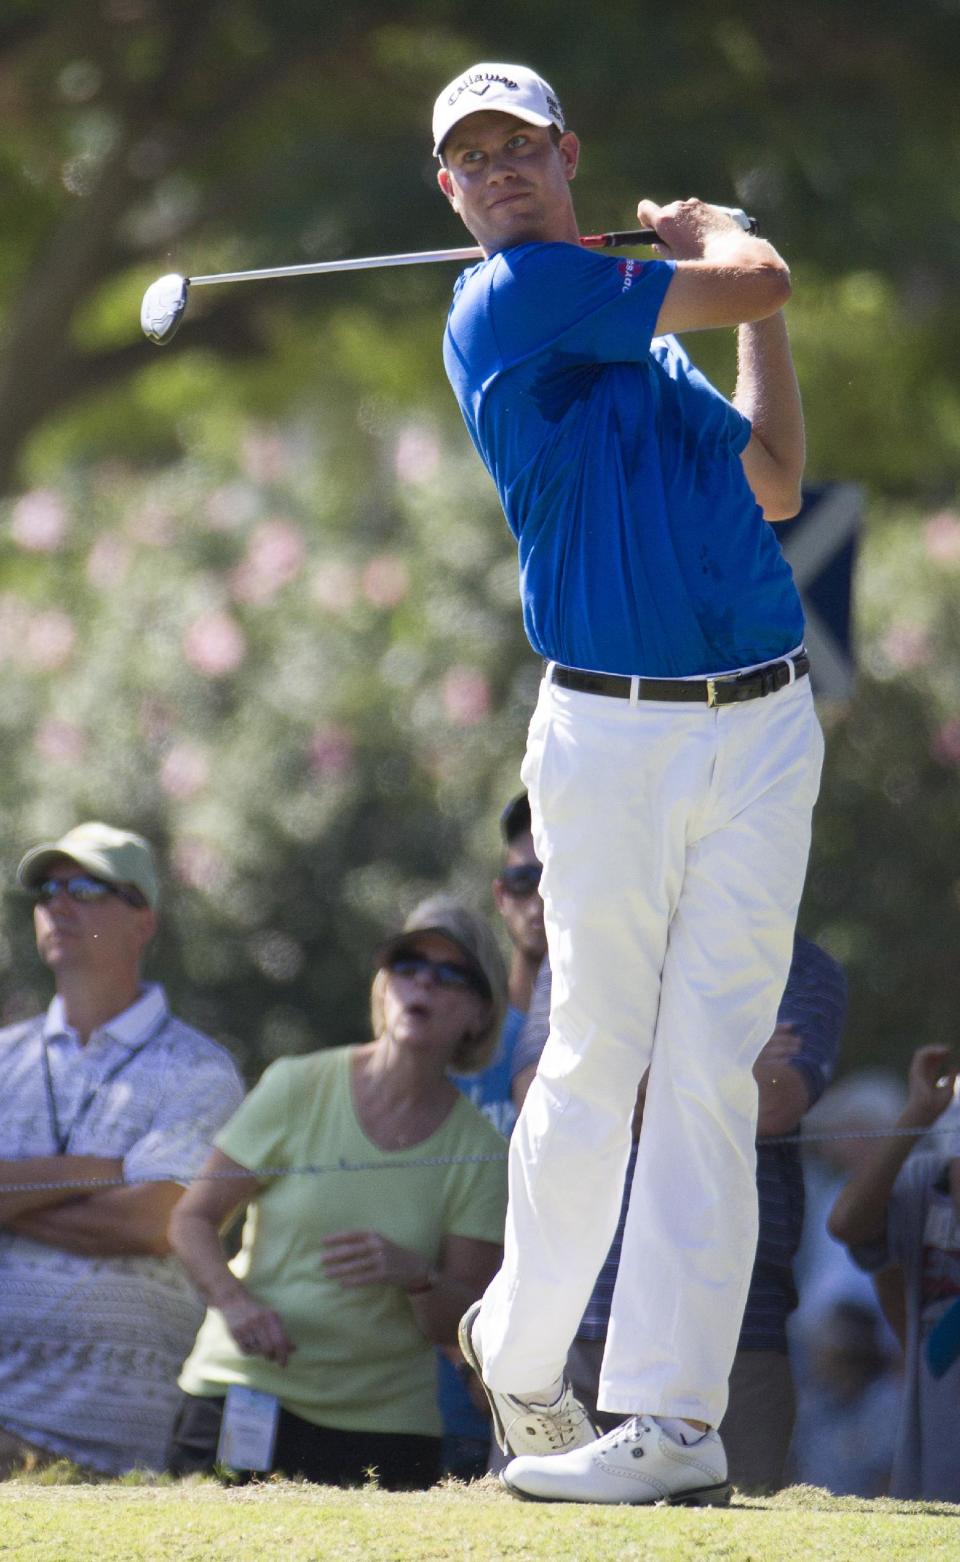 Harris English watches his drive off the second tee during the fourth round of the Sony Open golf tournament at Waialae Country Club, Sunday, Jan. 12, 2014, in Honolulu. (AP Photo/Eugene Tanner)